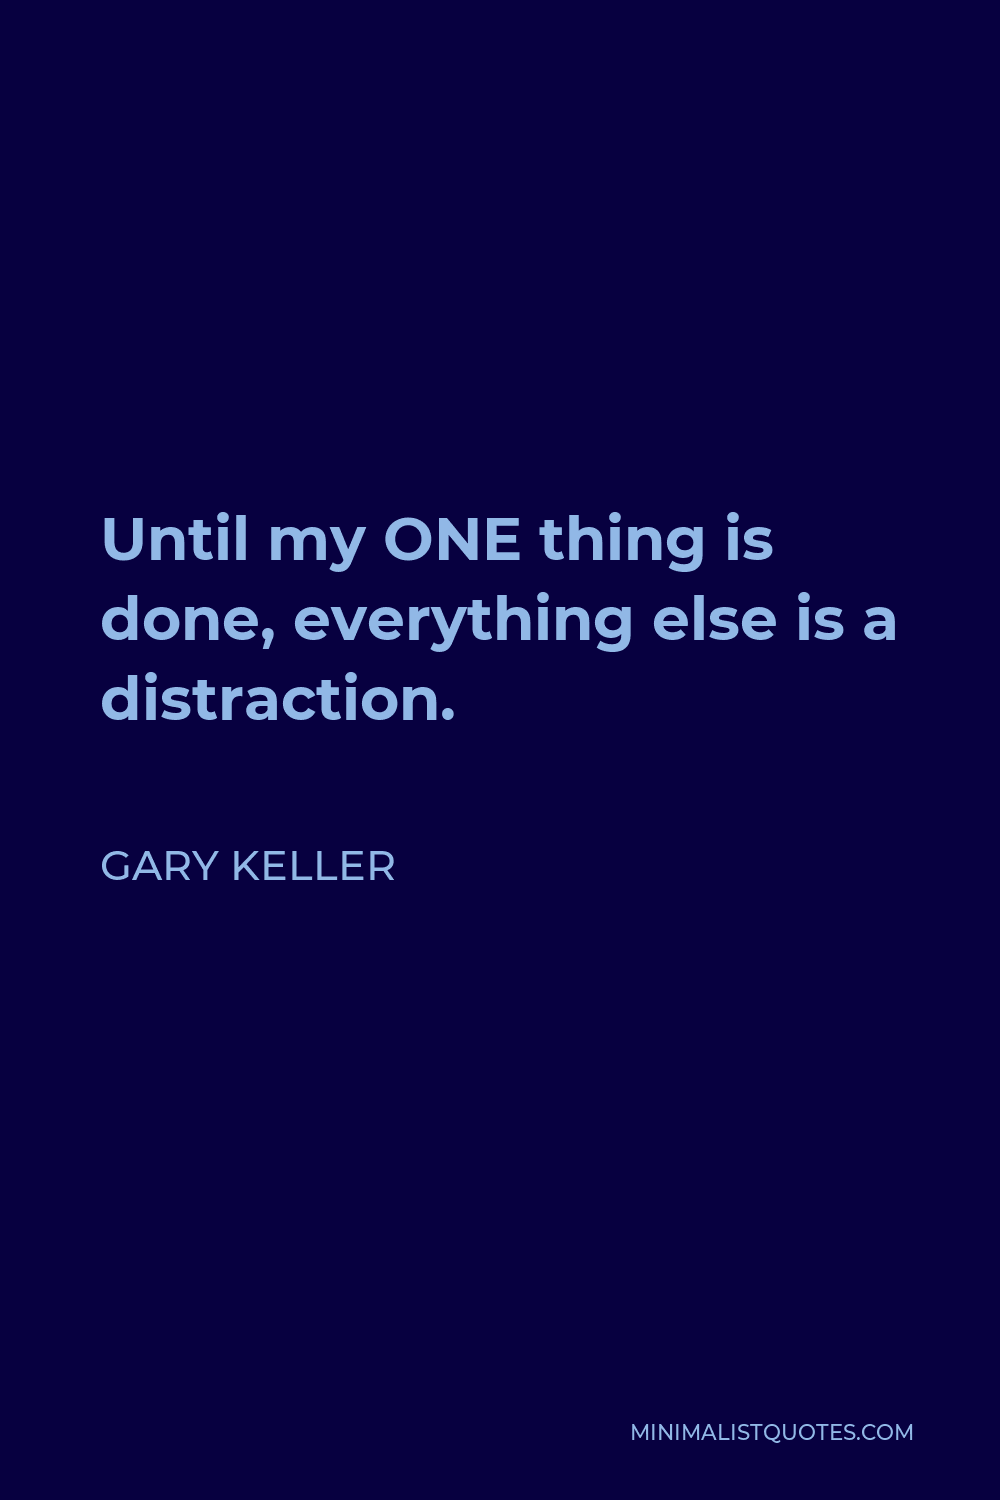 Gary Keller Quote - Until my ONE thing is done, everything else is a distraction.